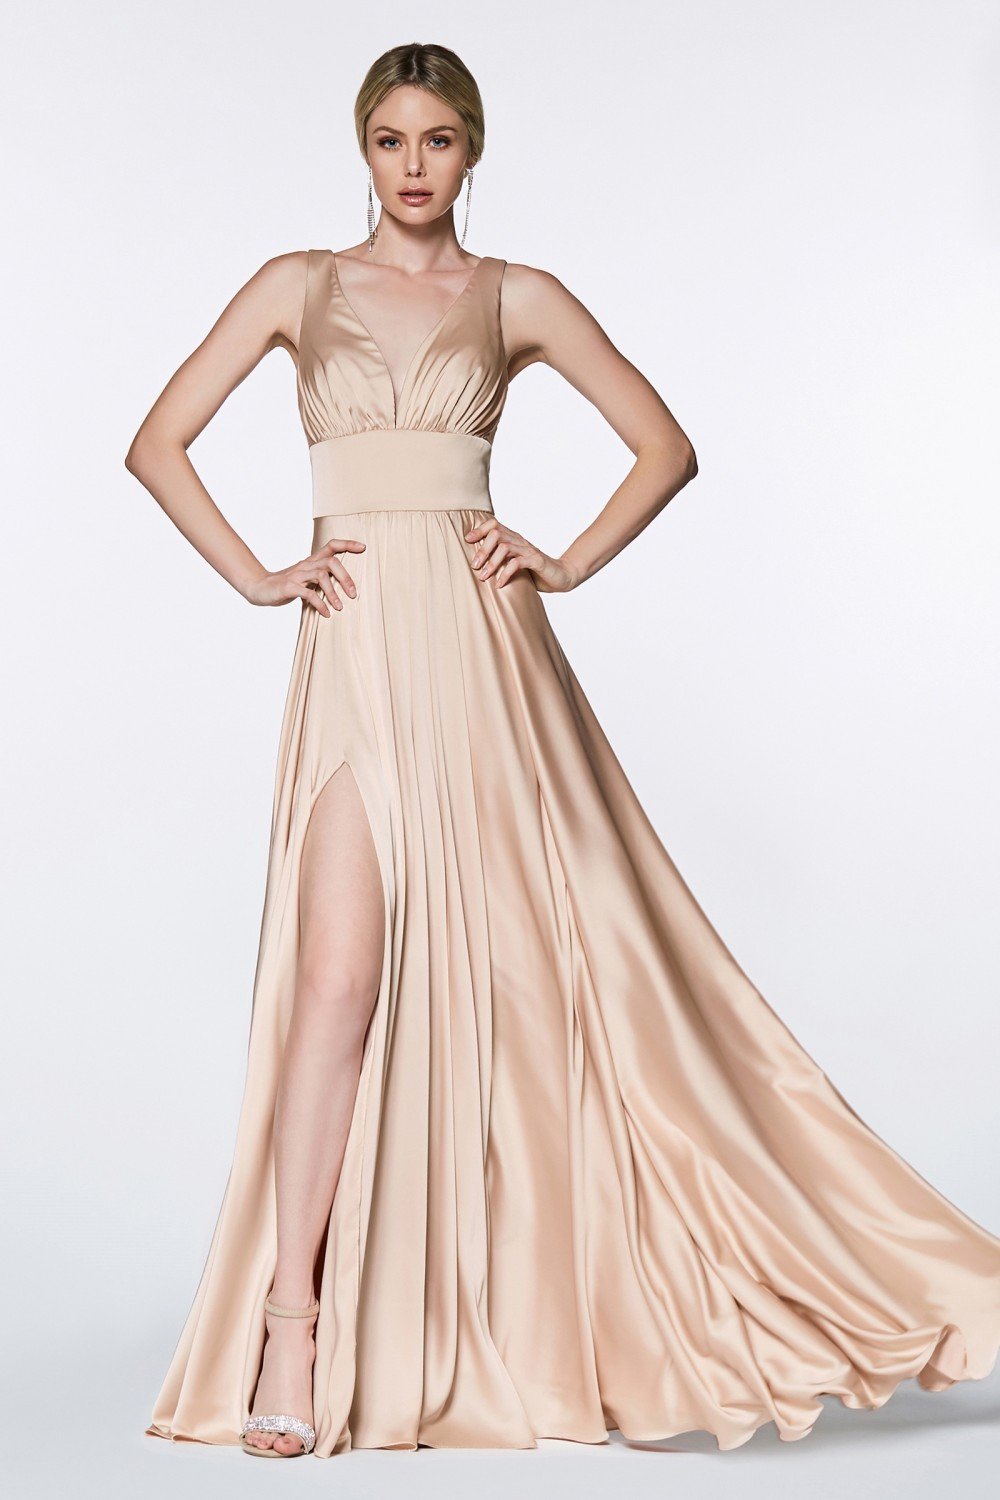 Satin Flowy A-line Dress by Cinderella Divine - 7469 (size 12-16) - Special Occasion